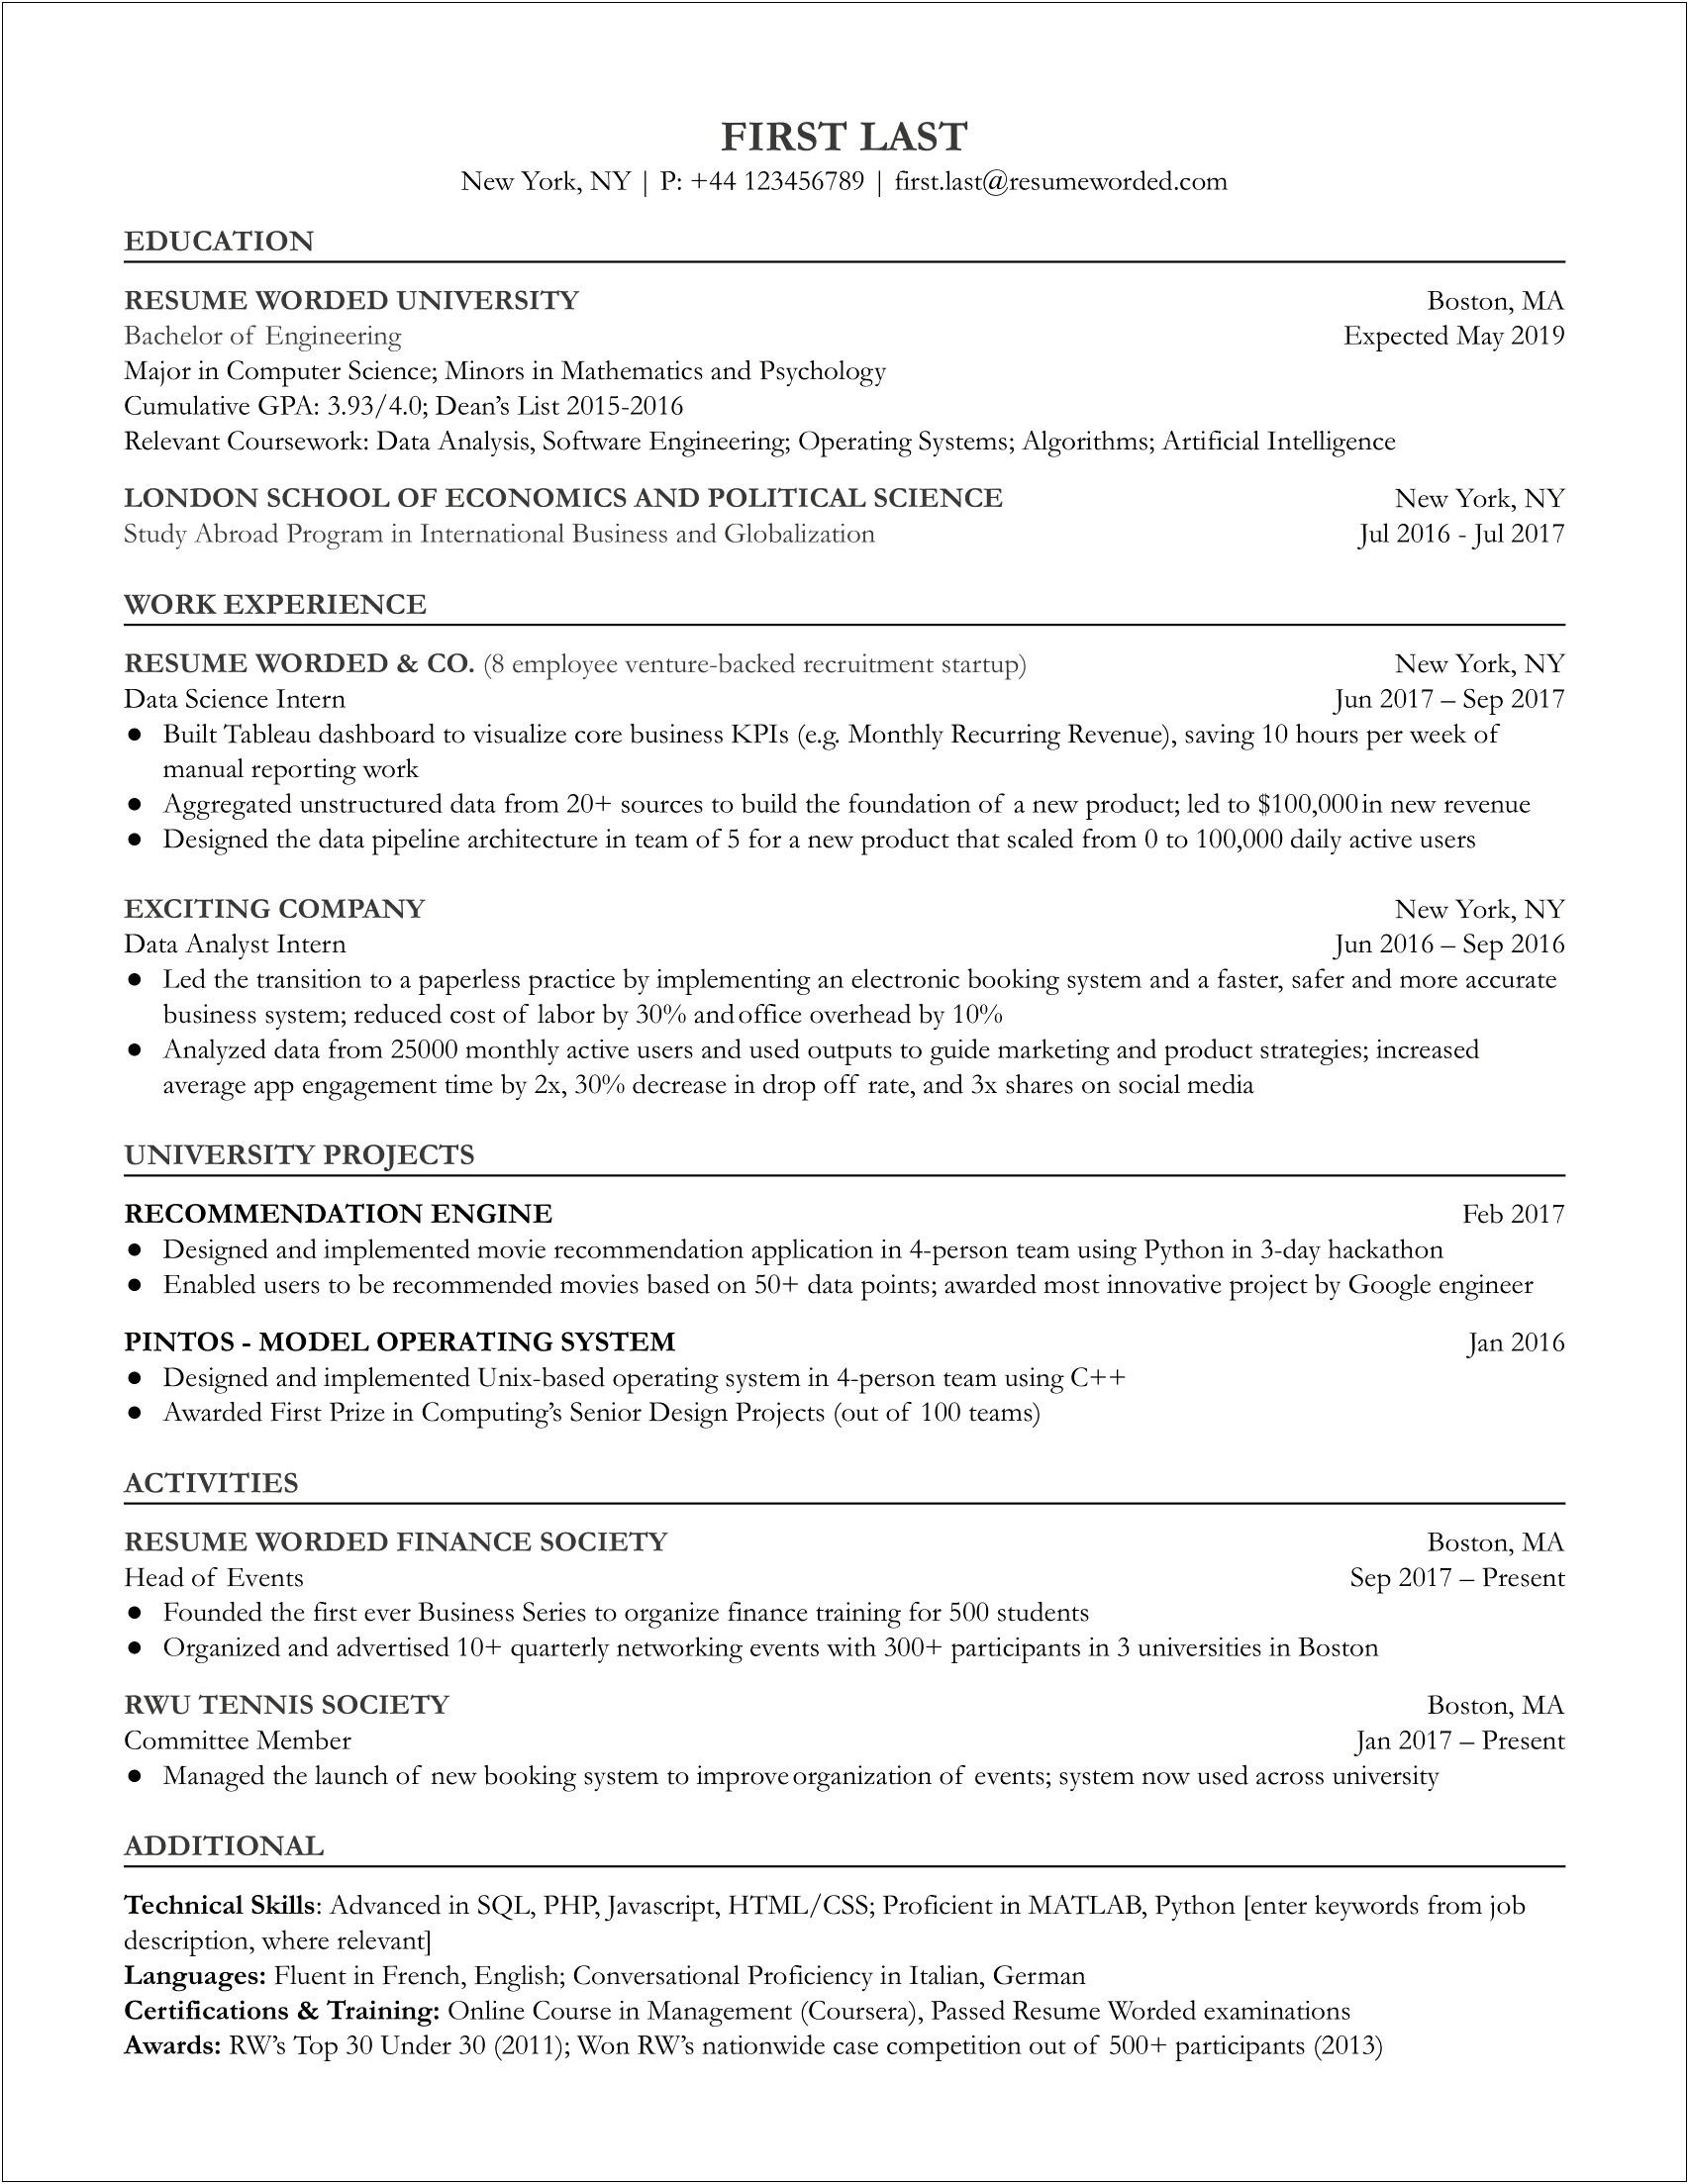 Should I List School Project On Resume